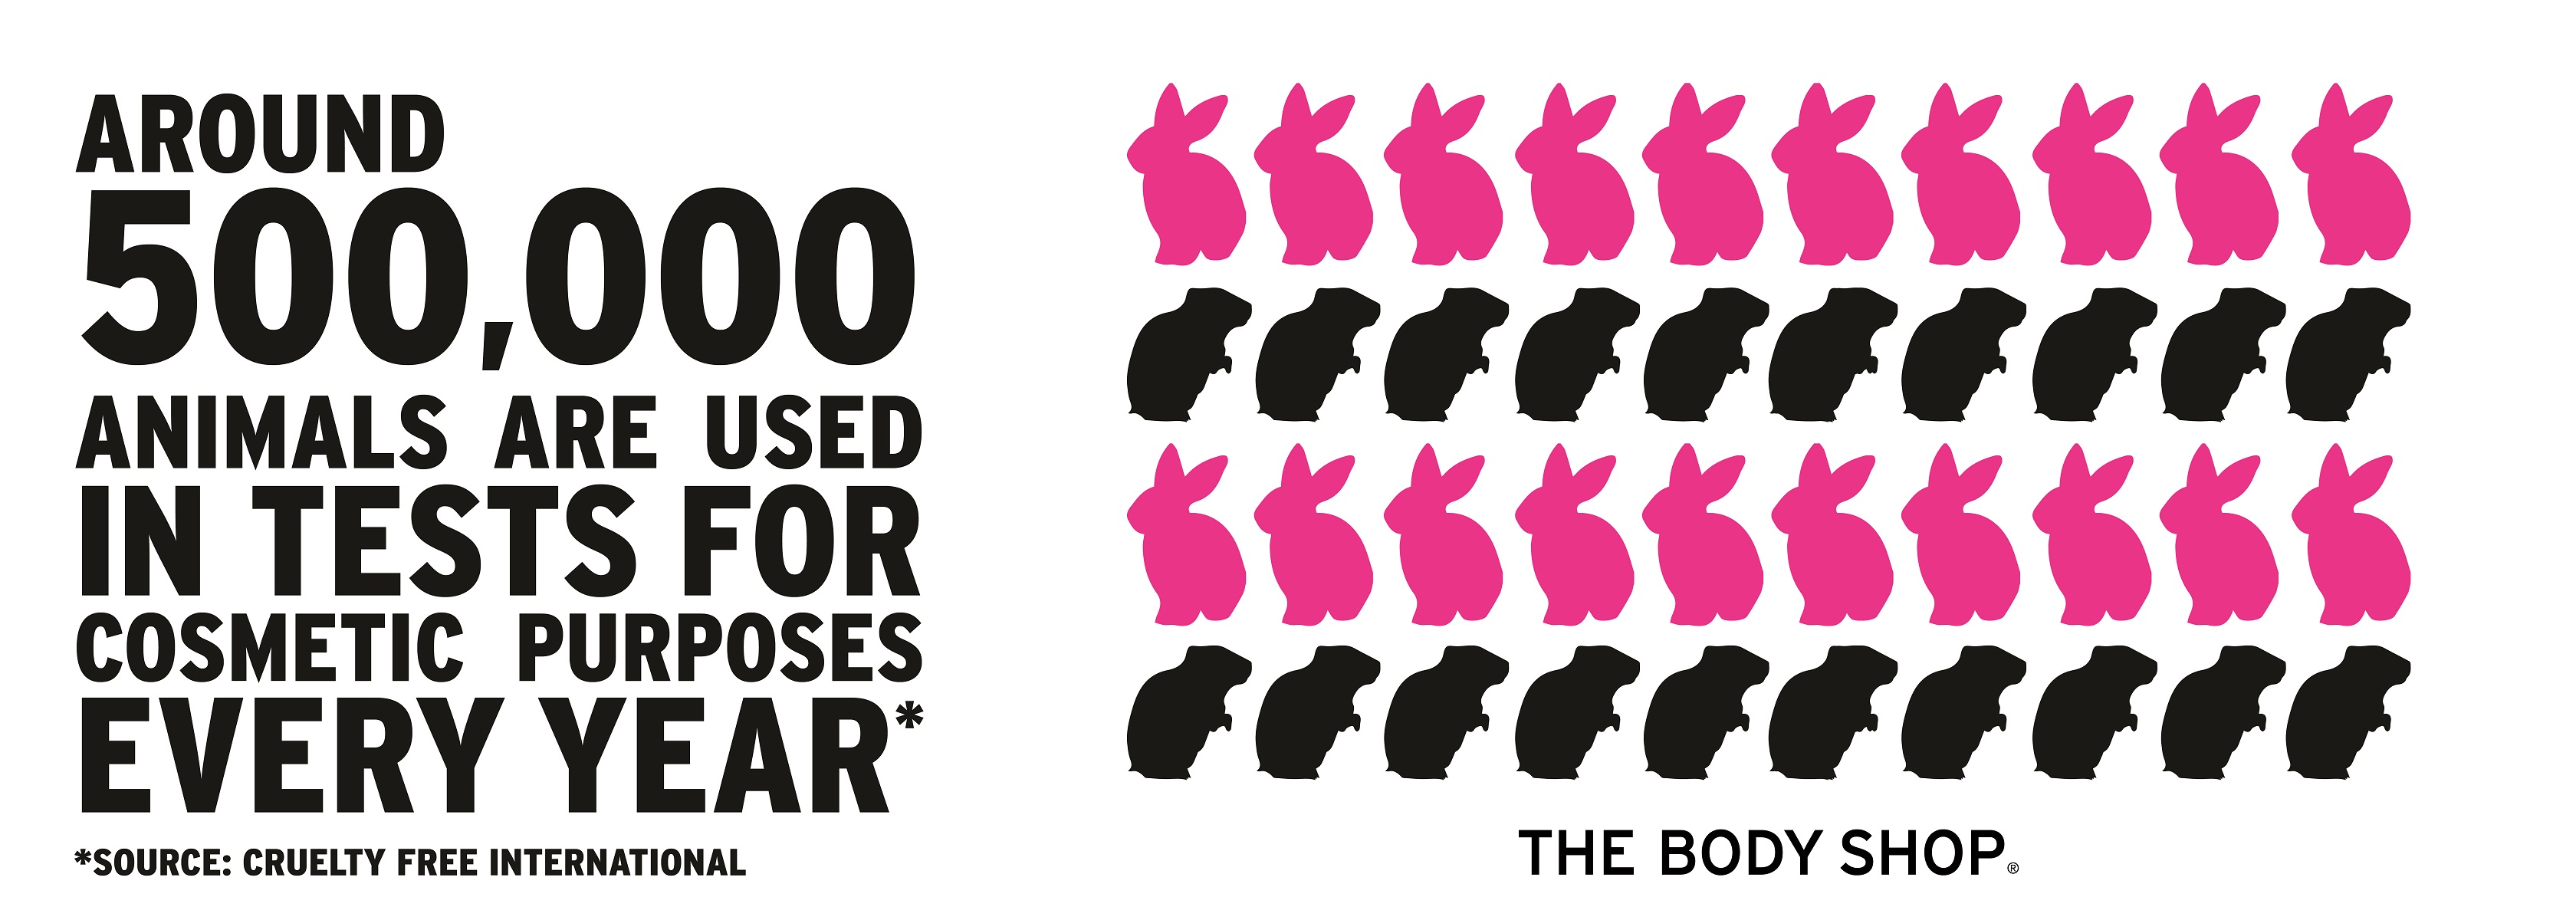 Support The Body Shop's Petition Against Animal Testing - Melbourne Central